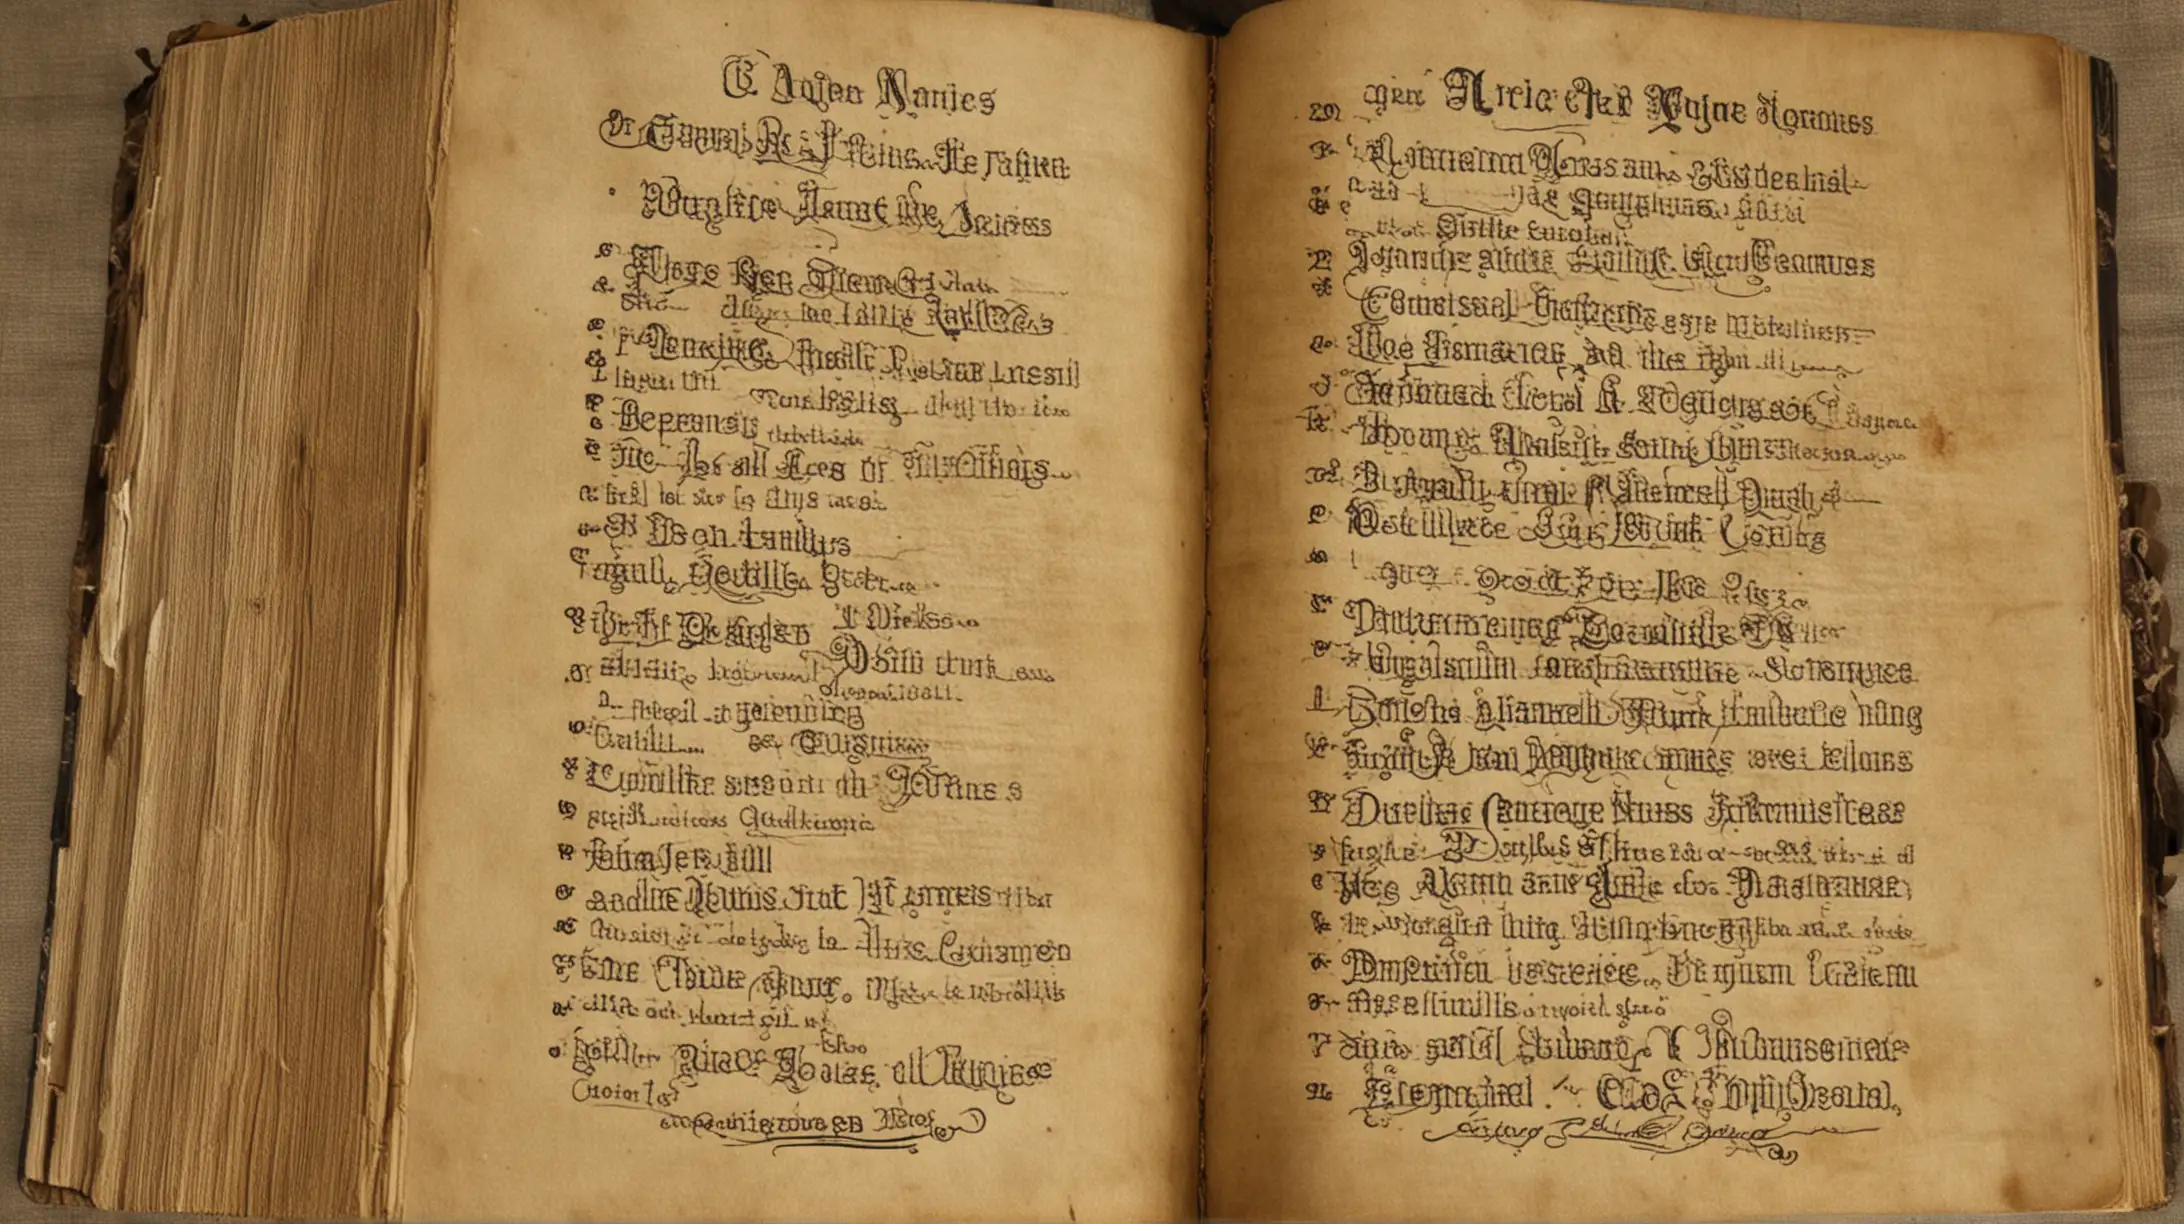 An old book of names and families